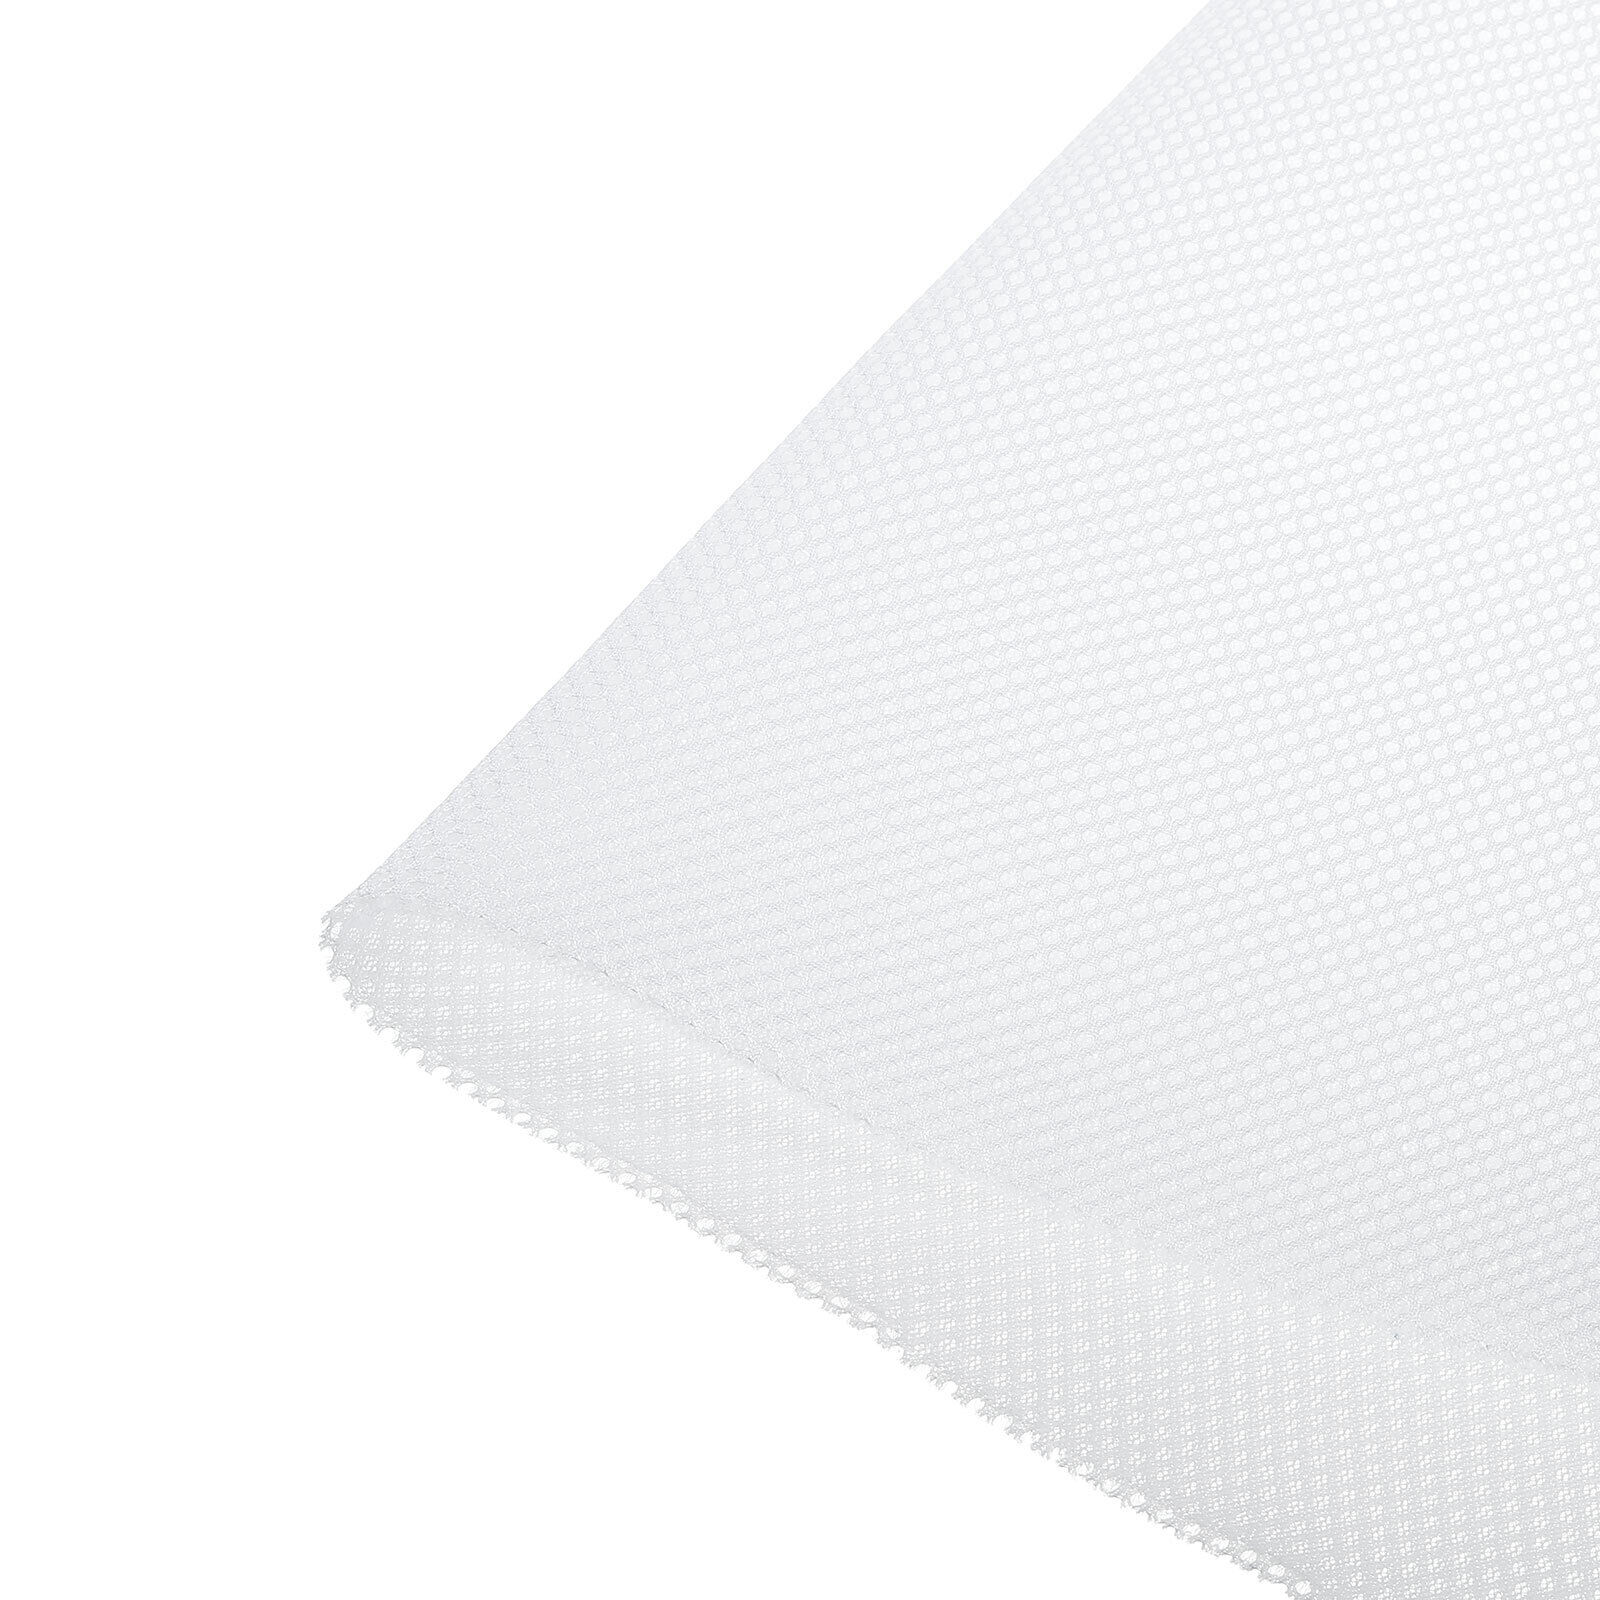 Speaker Grill Cloth 20 X 55 Inch Stereo Mesh Fabric Cloth For Speaker White